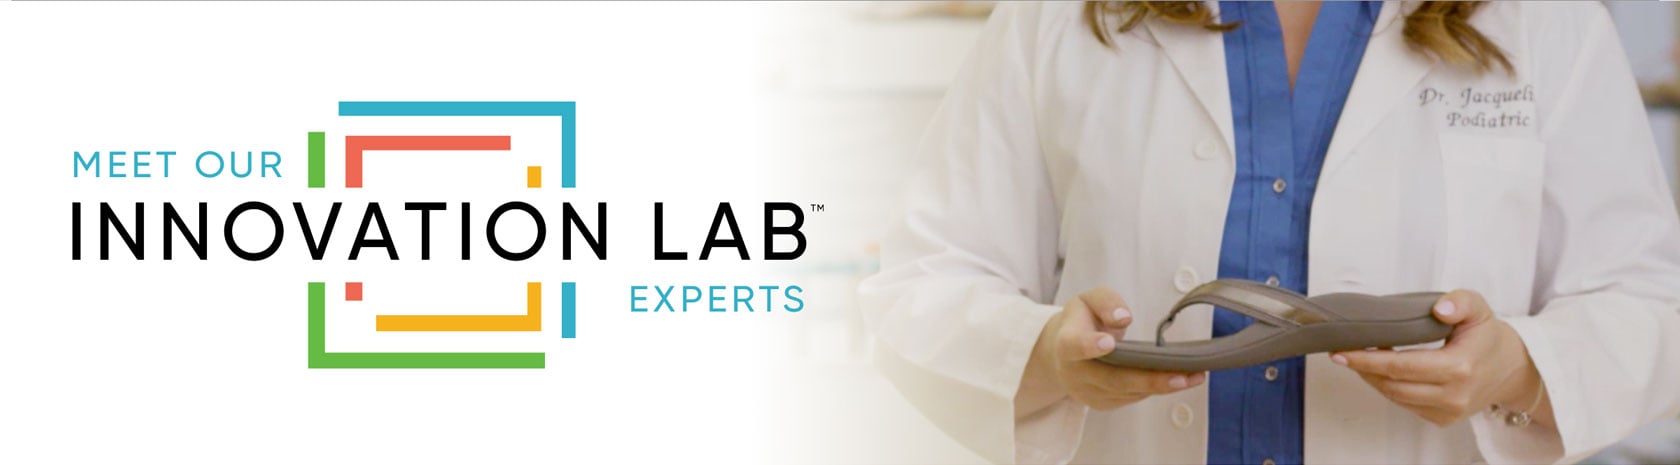 Meet Our Innovation Lab Experts